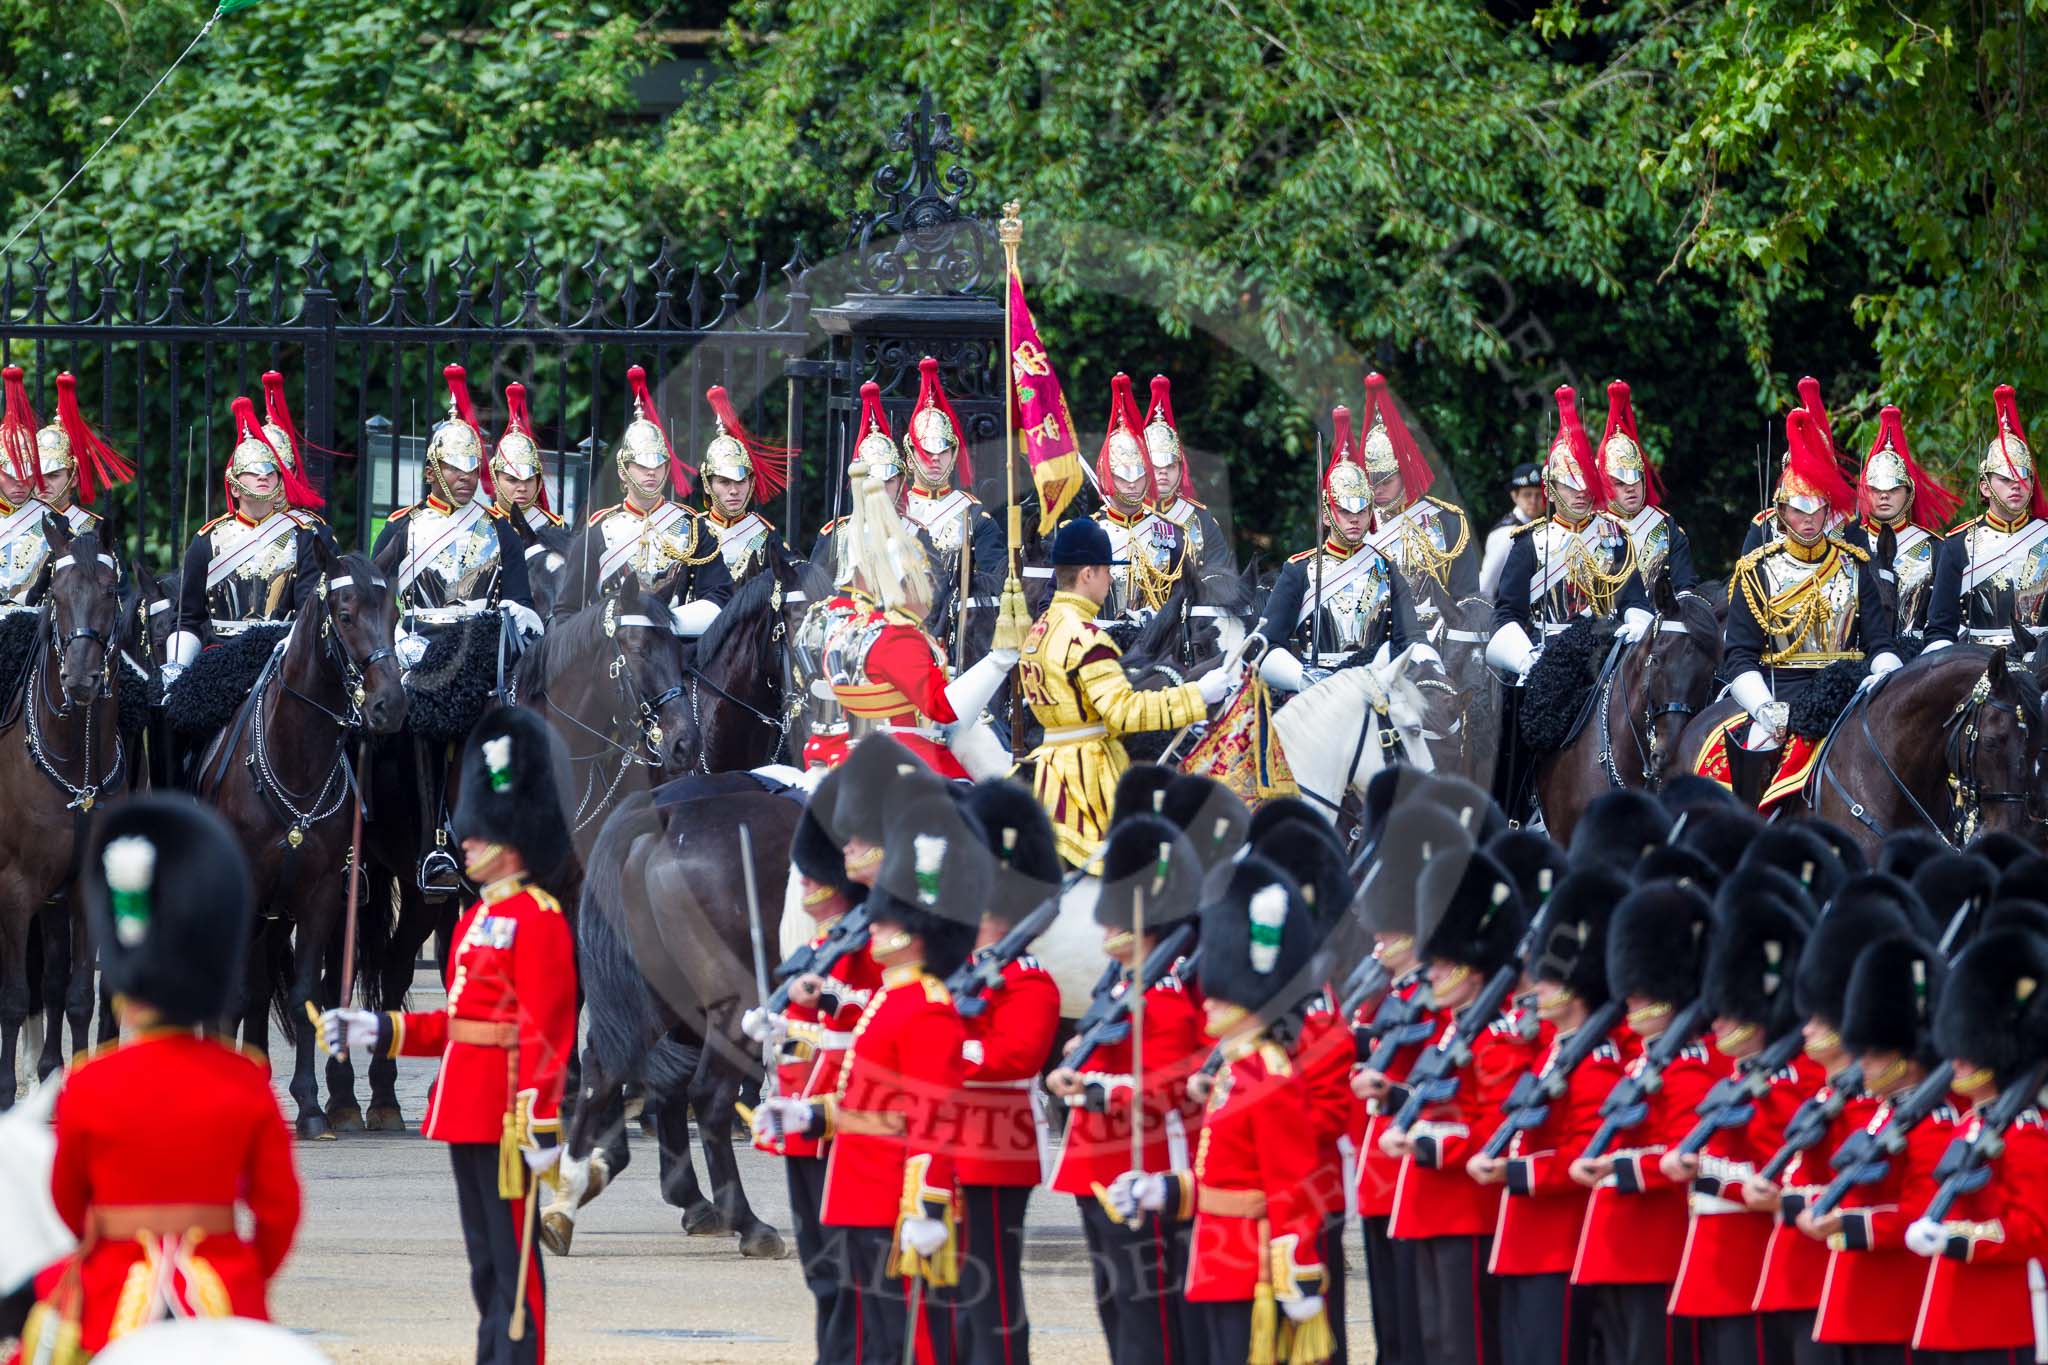 The Colonel's Review 2015.
Horse Guards Parade, Westminster,
London,

United Kingdom,
on 06 June 2015 at 12:02, image #563